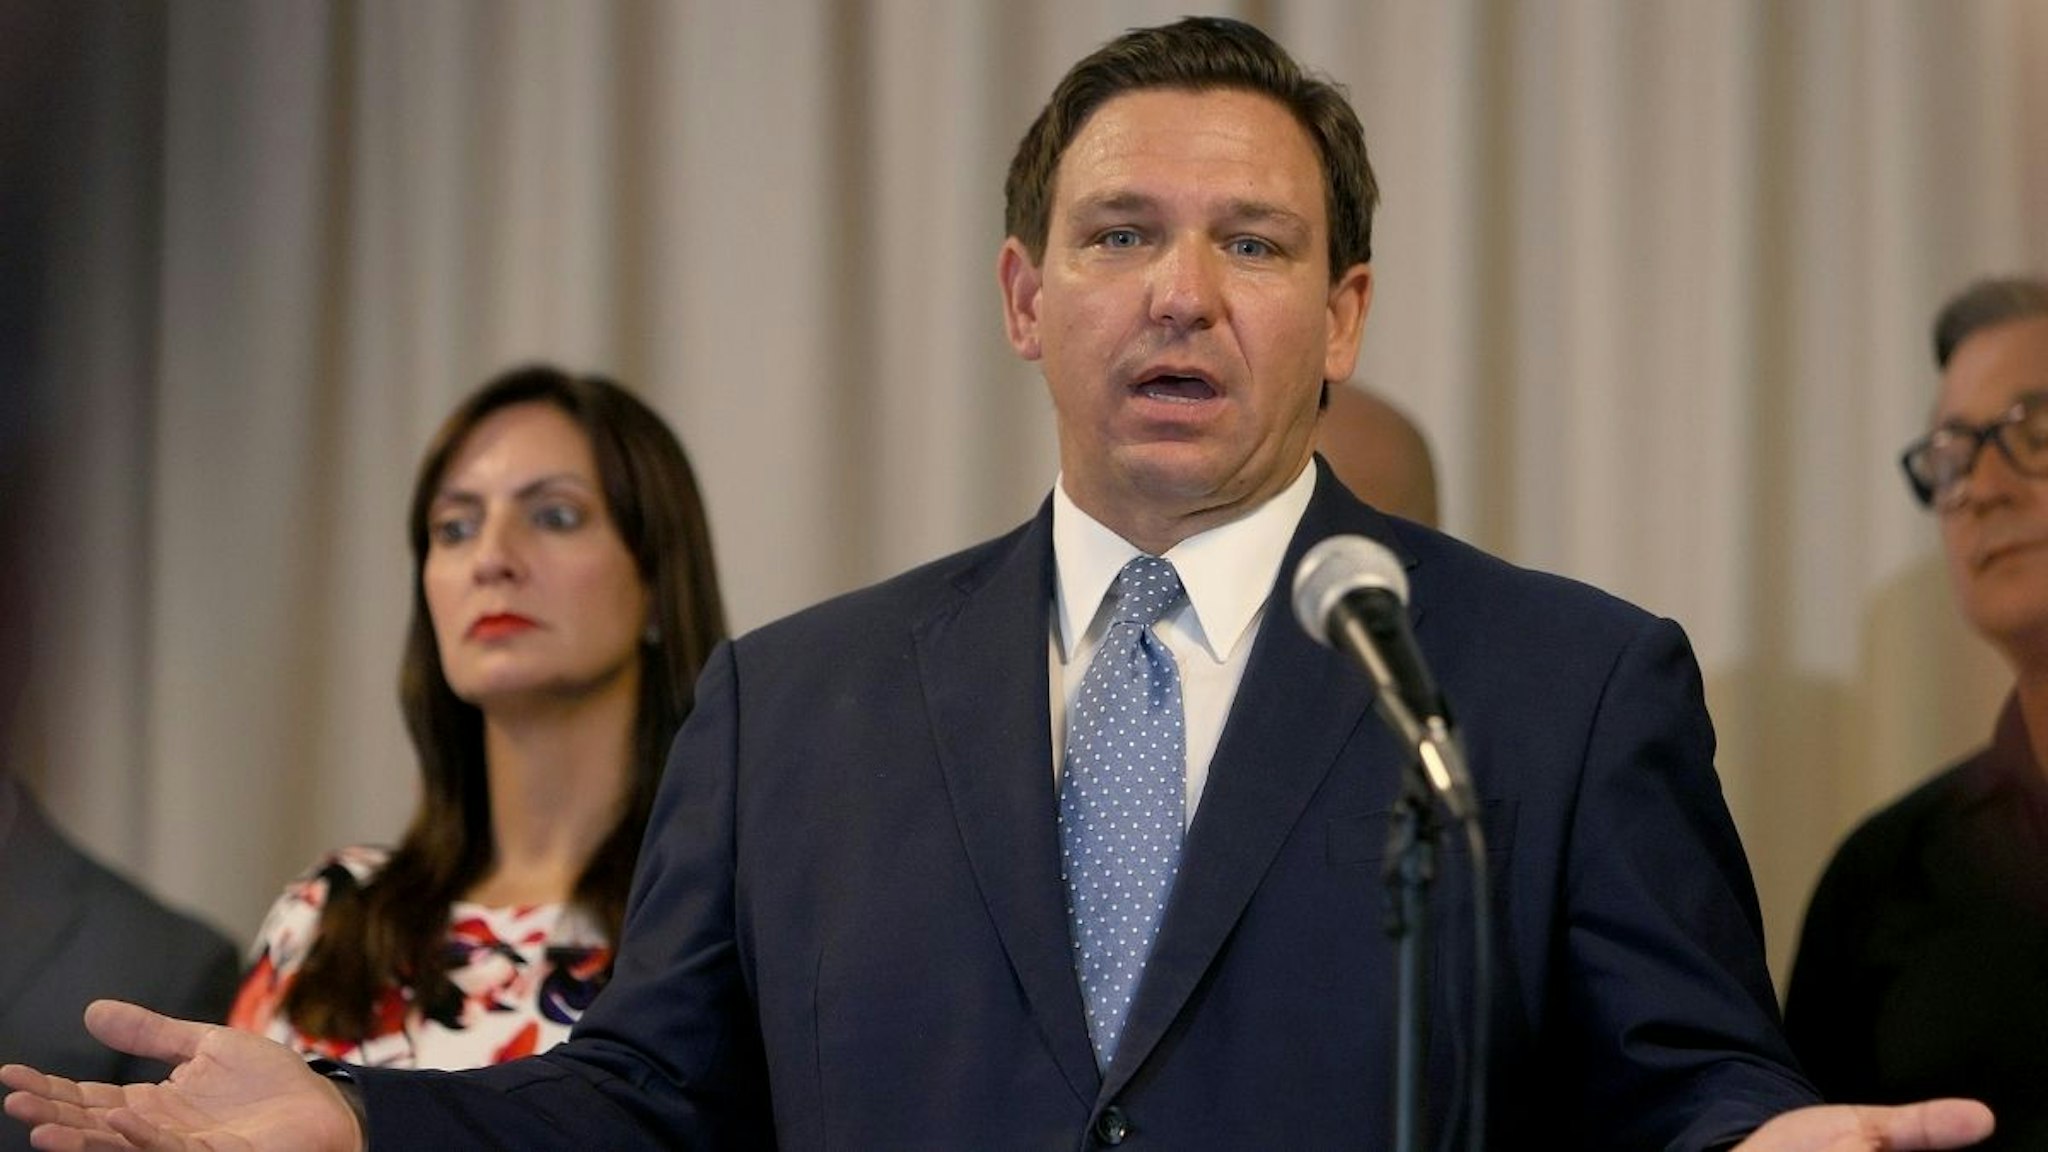 Florida Gov. Ron DeSantis speaks during an event to give out bonuses to first responders held at the Grand Beach Hotel Surfside on August 10, 2021 in Surfside, Florida.